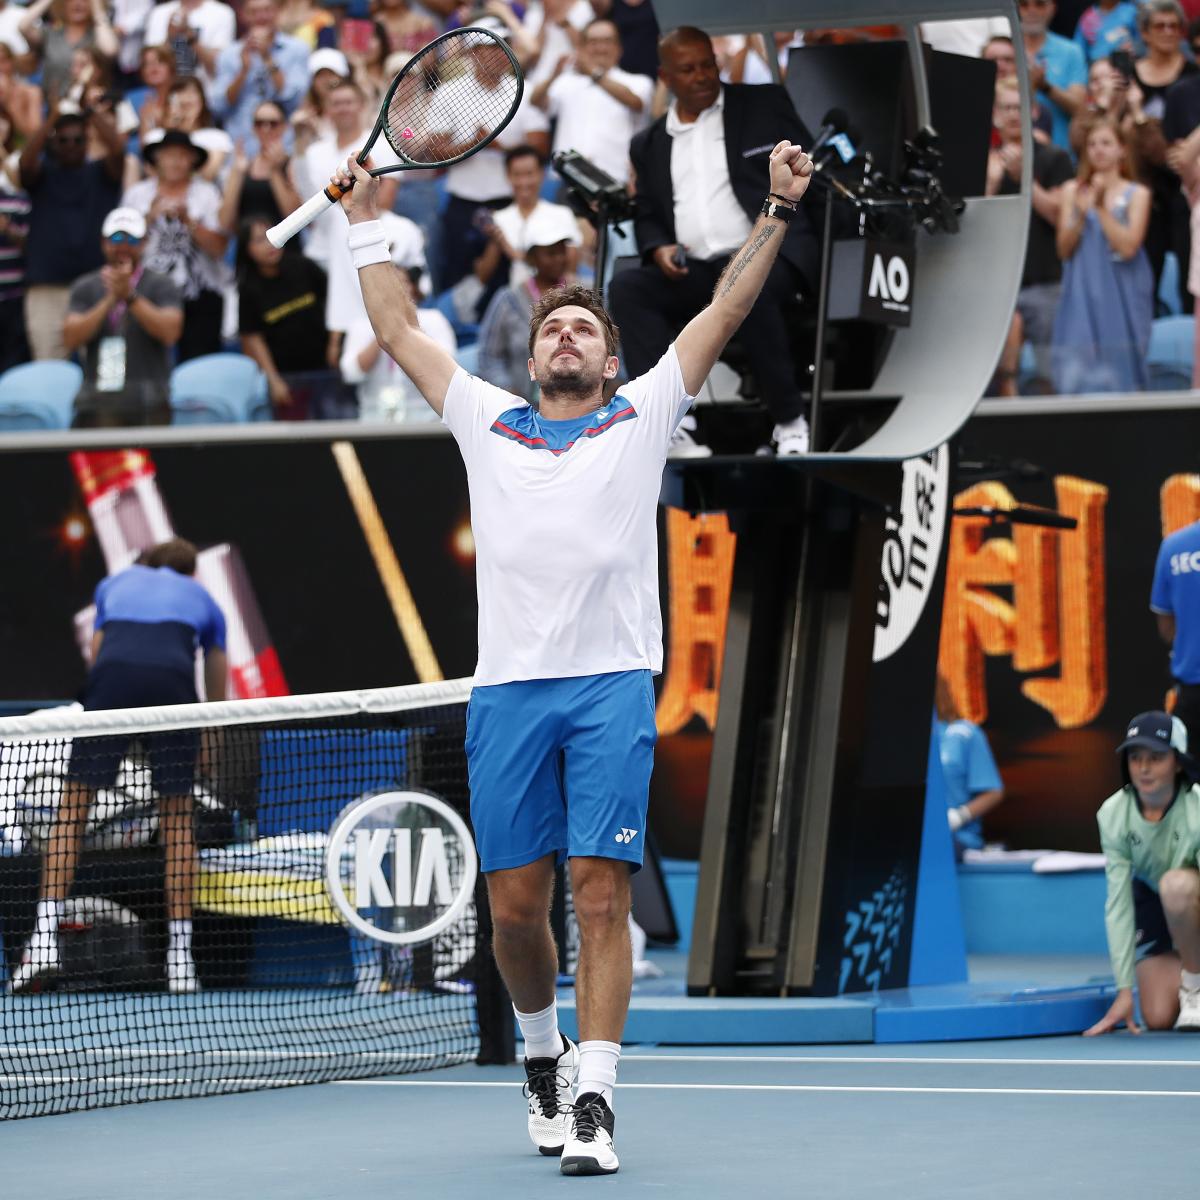 rod hage beskæftigelse Australian Open 2020 Results: Monday Bracket Winners, Scores and Top Stats  | Bleacher Report | Latest News, Videos and Highlights